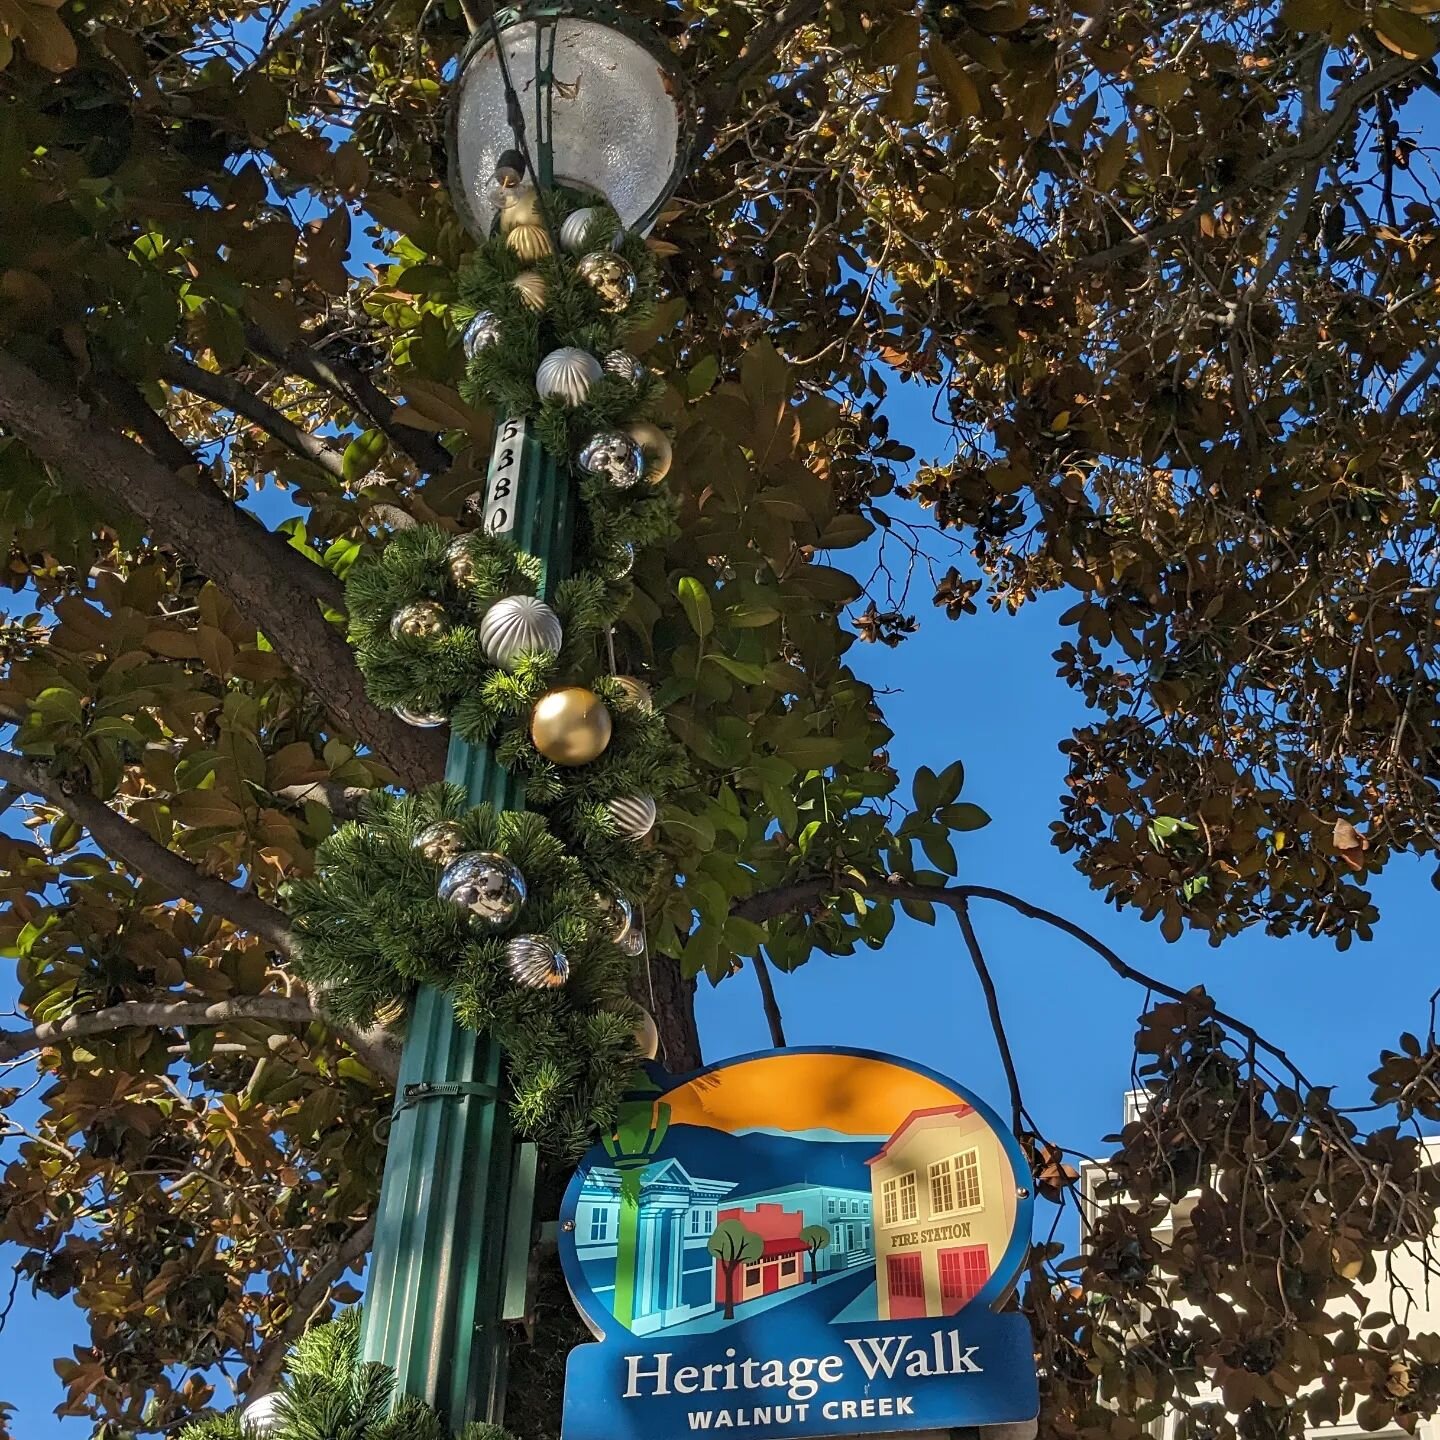 It is beginning to look like the holiday season has arrived in downtown Walnut Creek 🌟

Holiday festivities are beginning all around town - including a Holiday Parade of Lights &amp; Tree Lighting in @broadway_plaza tomorrow evening (11/30)  from 5: